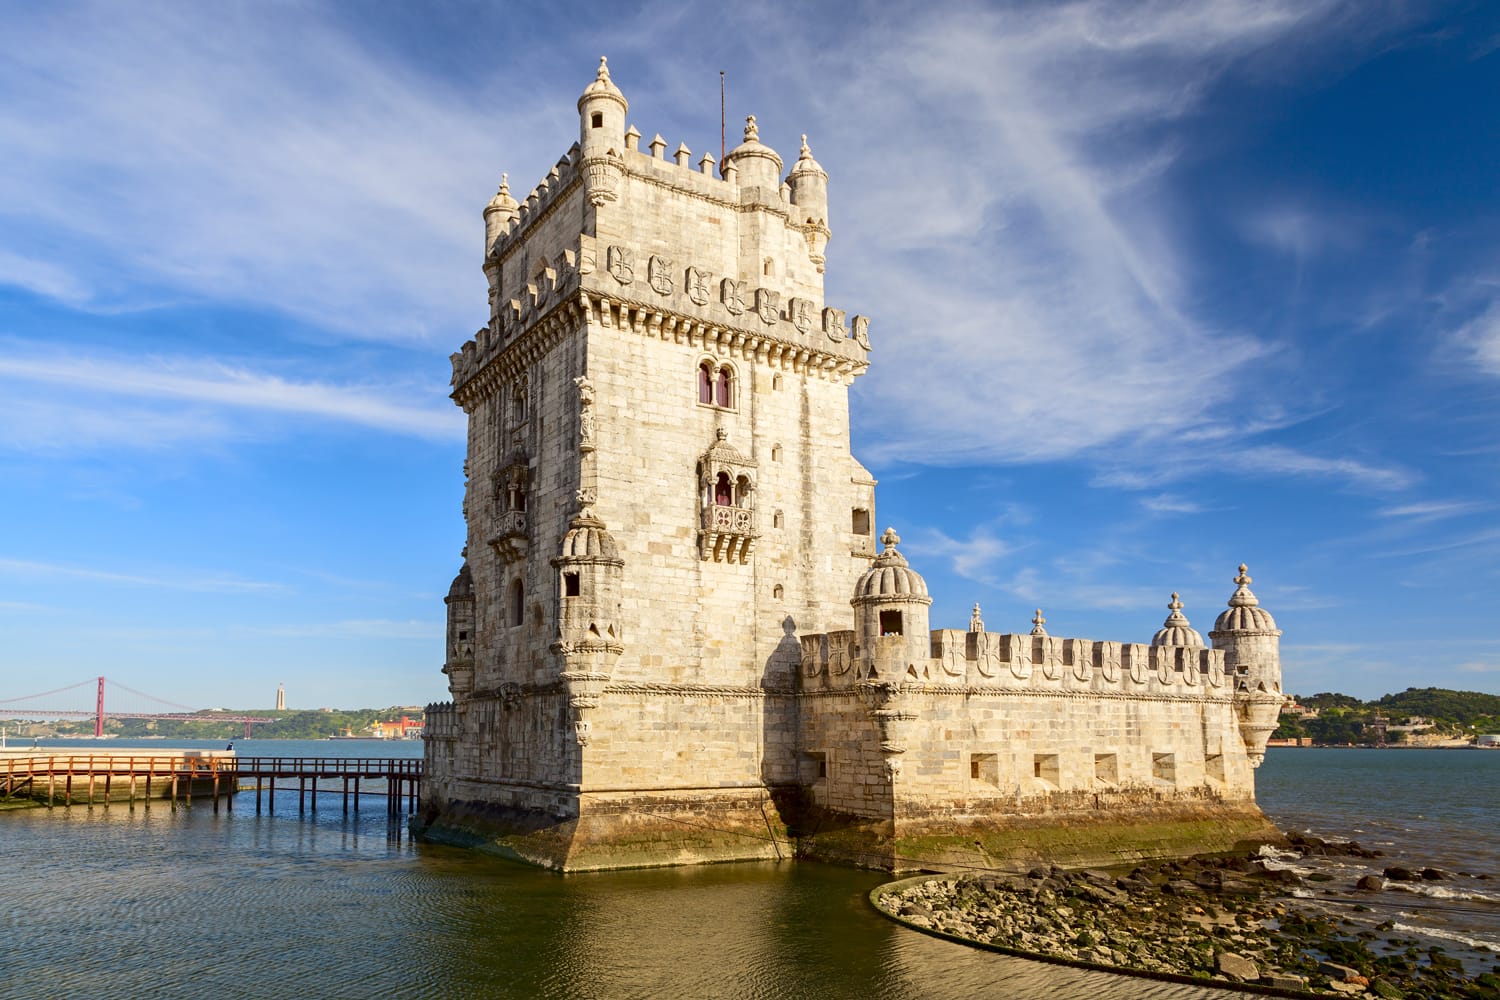 Belem Tower in the city of Lisbon, Portugal